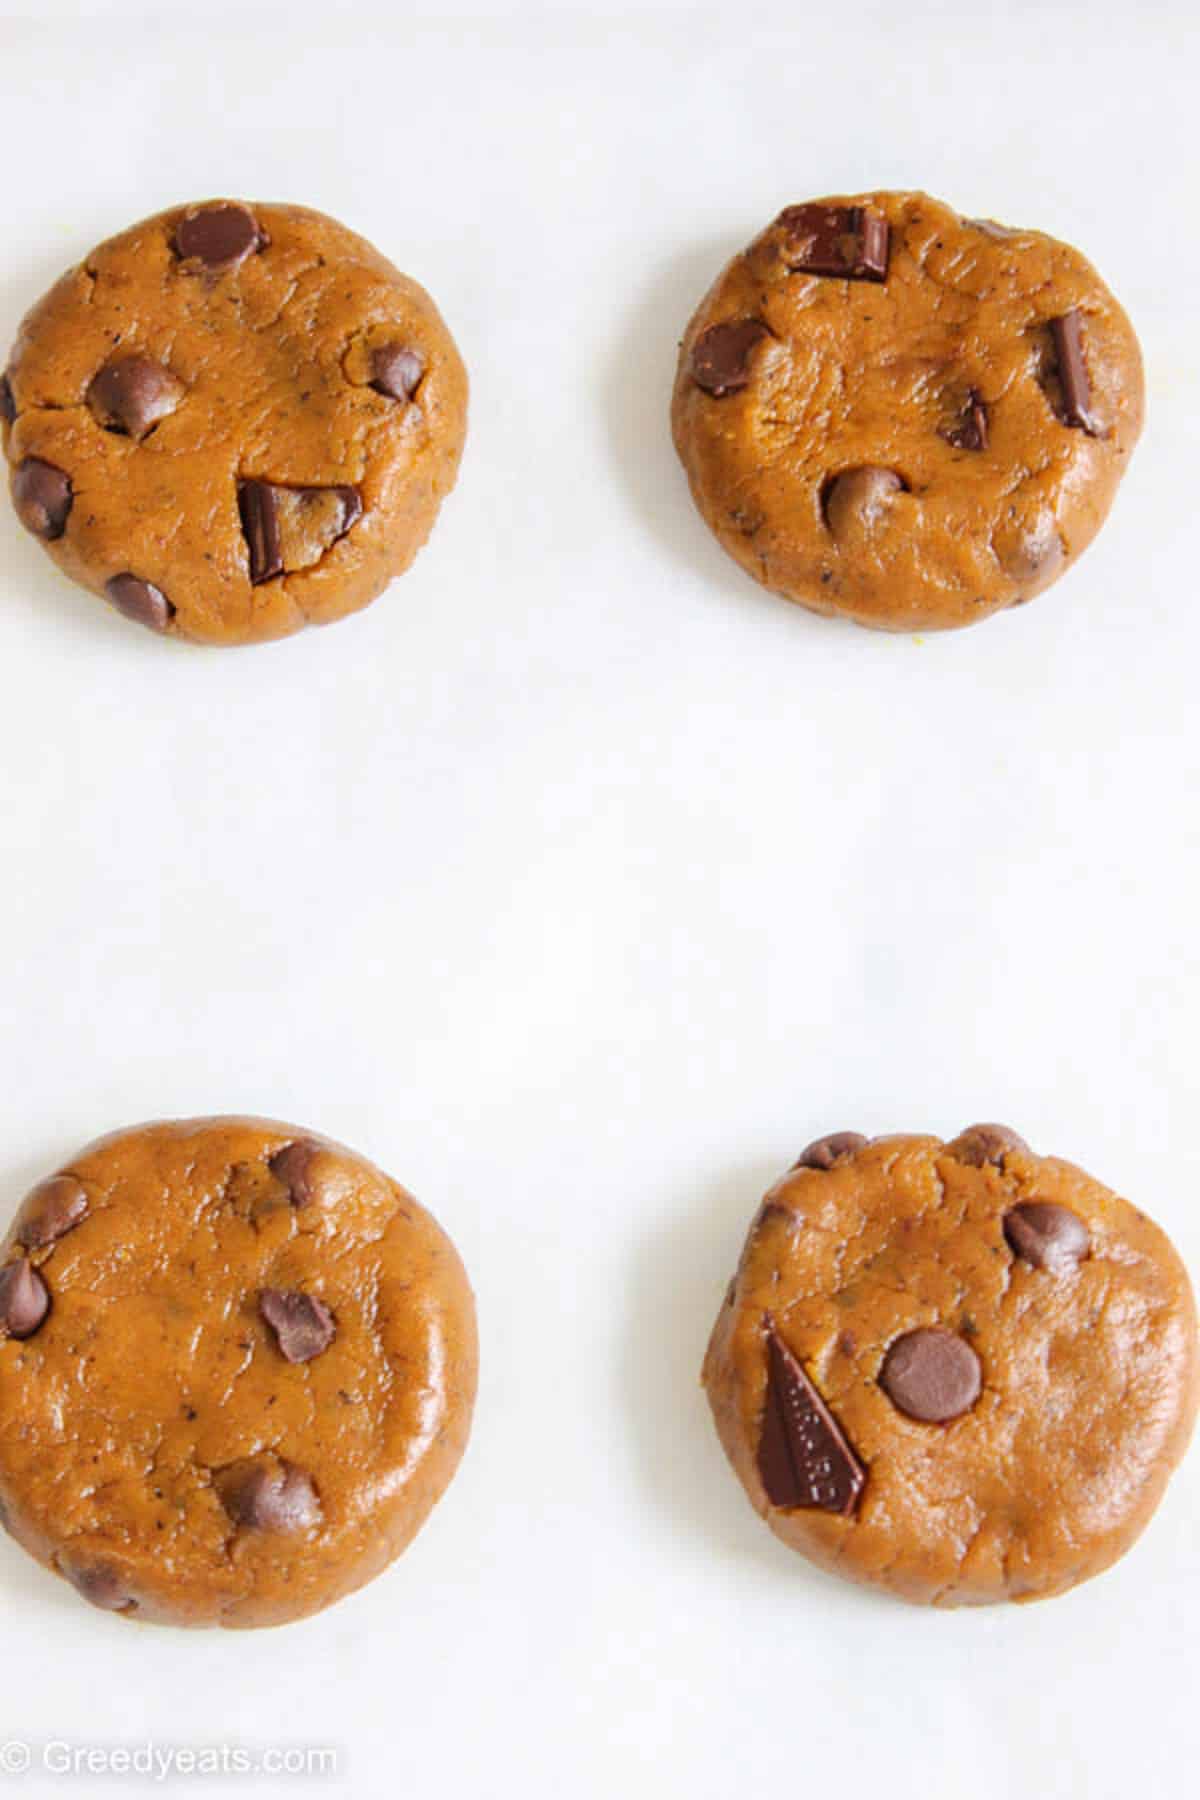 Pumpkin Cookie dough balls flattened before baking to allow them to spread as cookies bake.